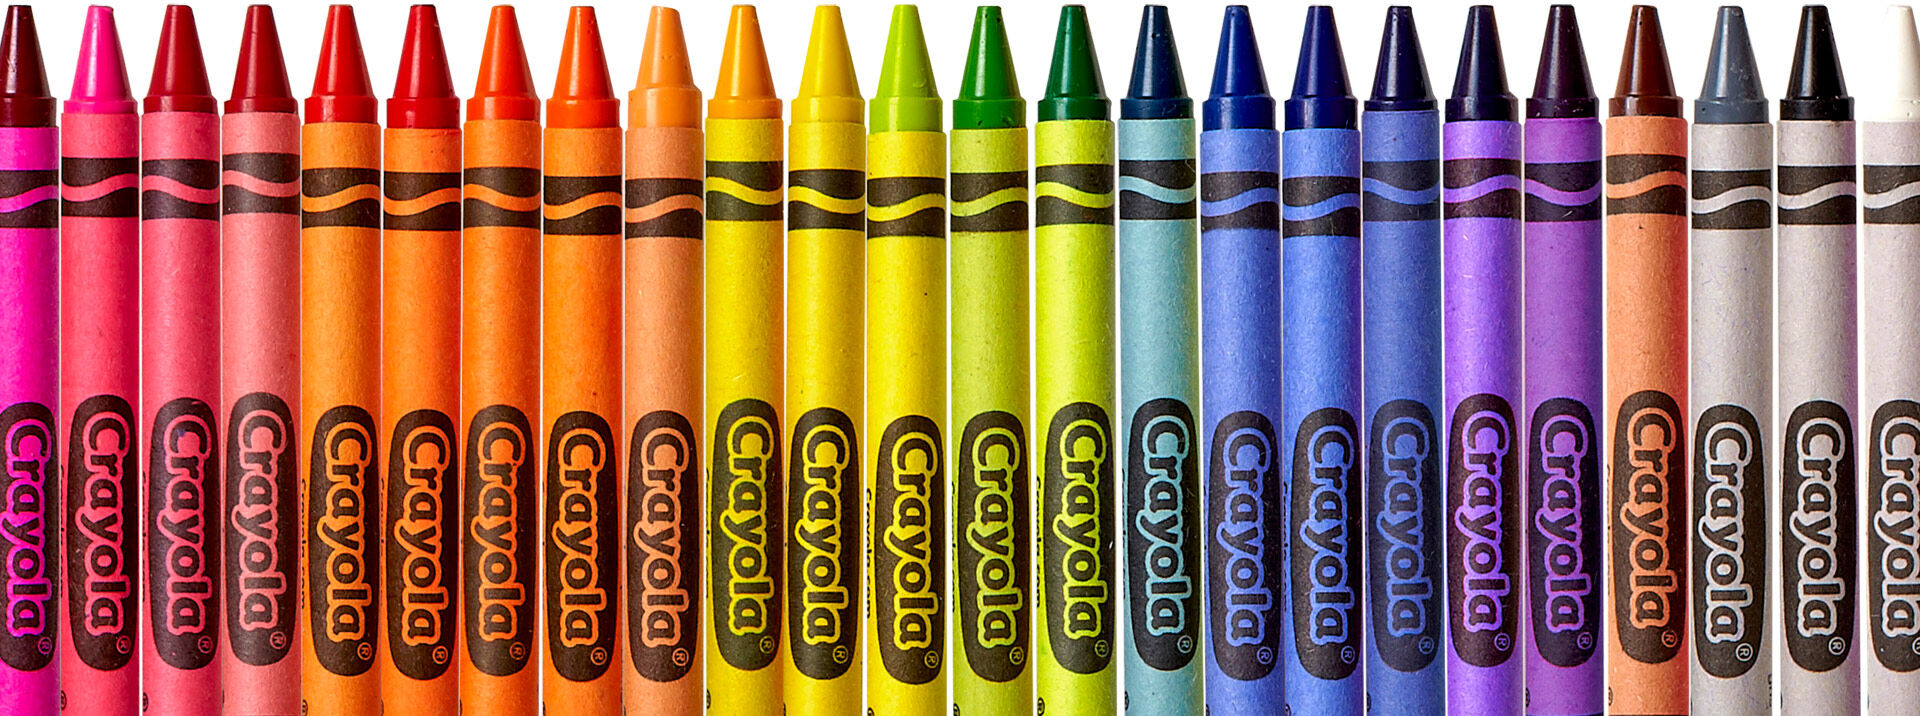 The Crayons 10